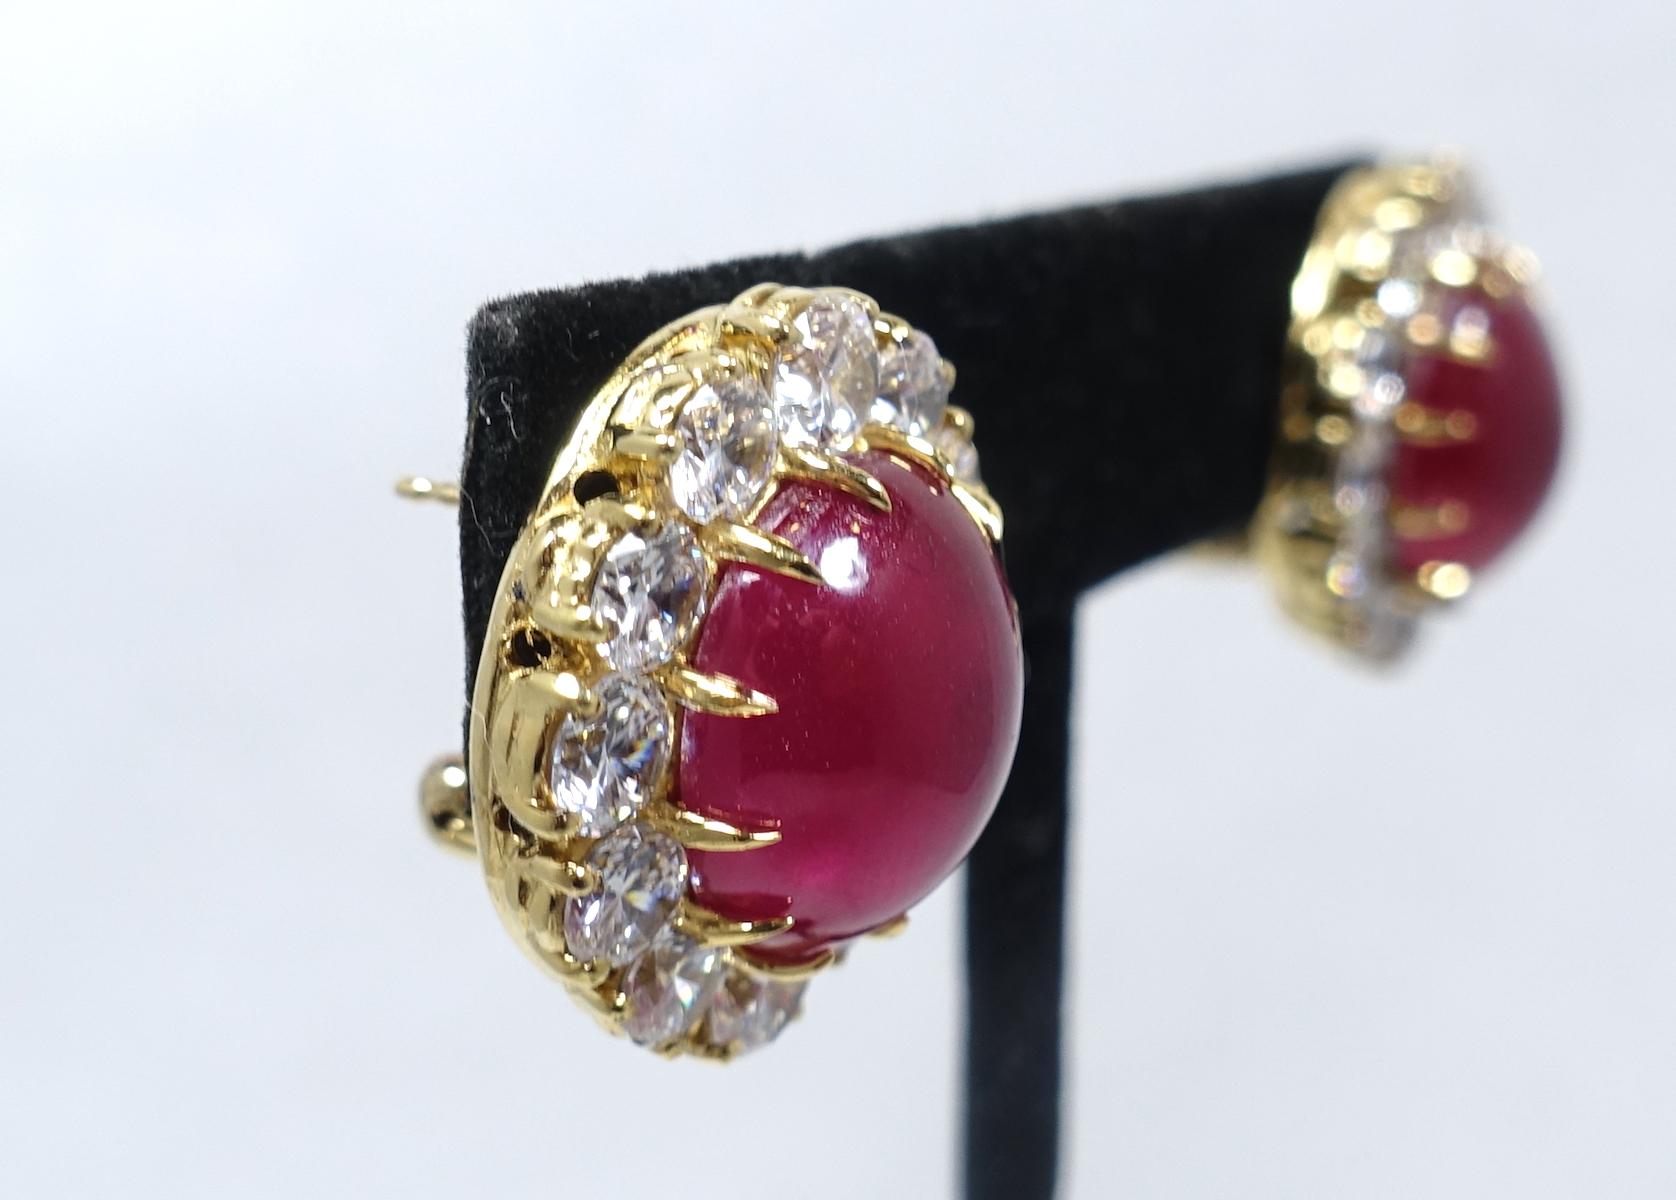 These vintage pierced earrings, although are not signed, have a high quality designer look. The center has red cabochon stones surrounded with brilliant clear crystals in a gold tone setting.  These earrings measure 7/8” x 3/4” and are in excellent